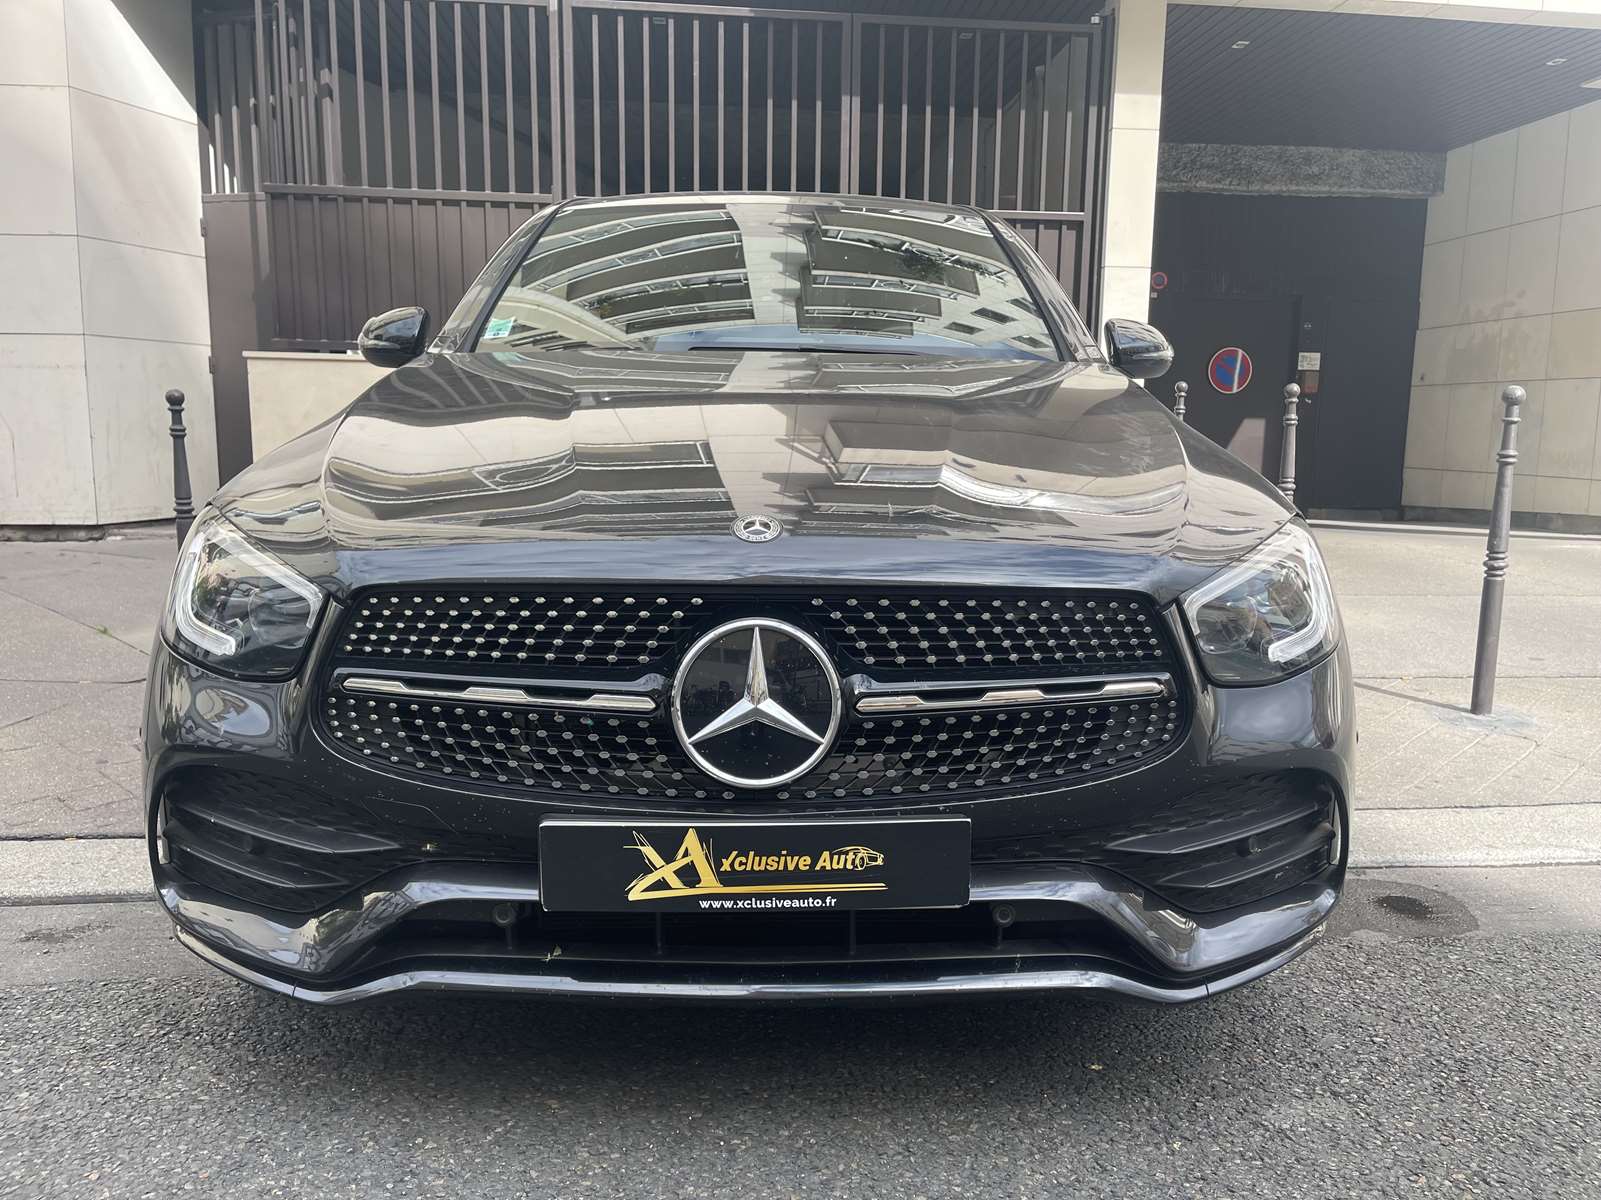 MERCEDES GLC COUPE (2) 220 D 4MATIC AMG LINE 9G-TRONIC 6